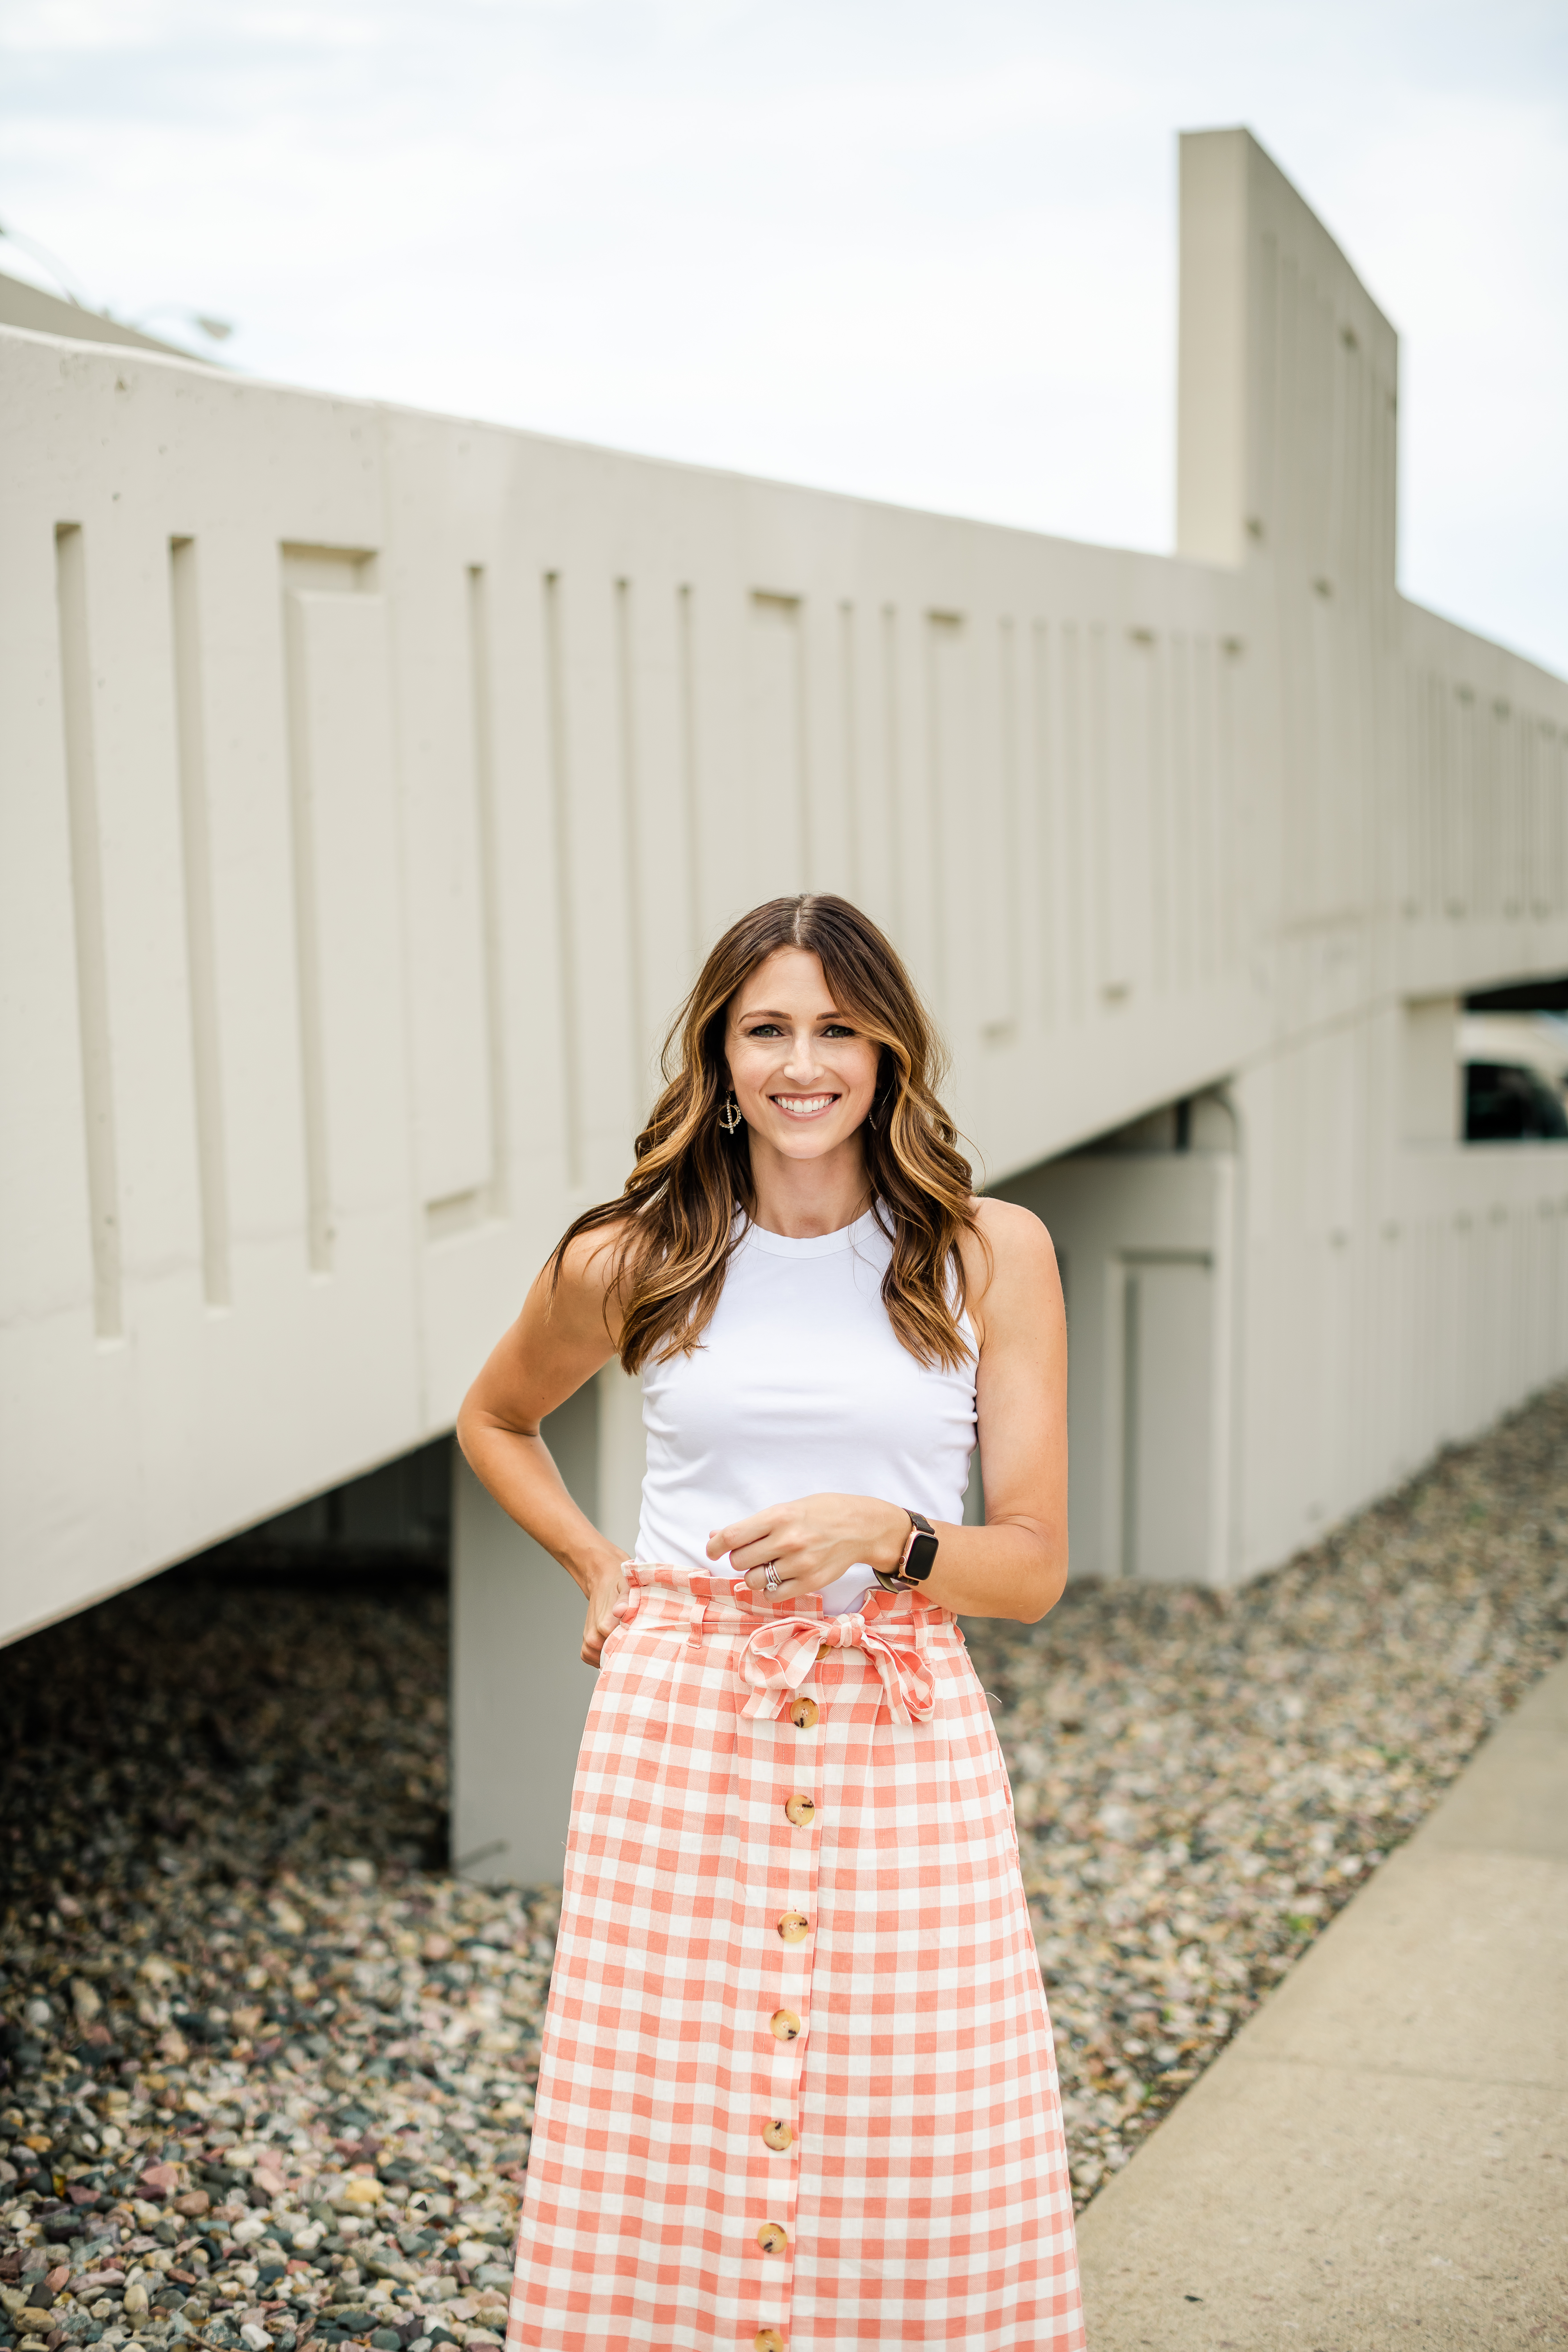 Midi skirt - Midwest In Style